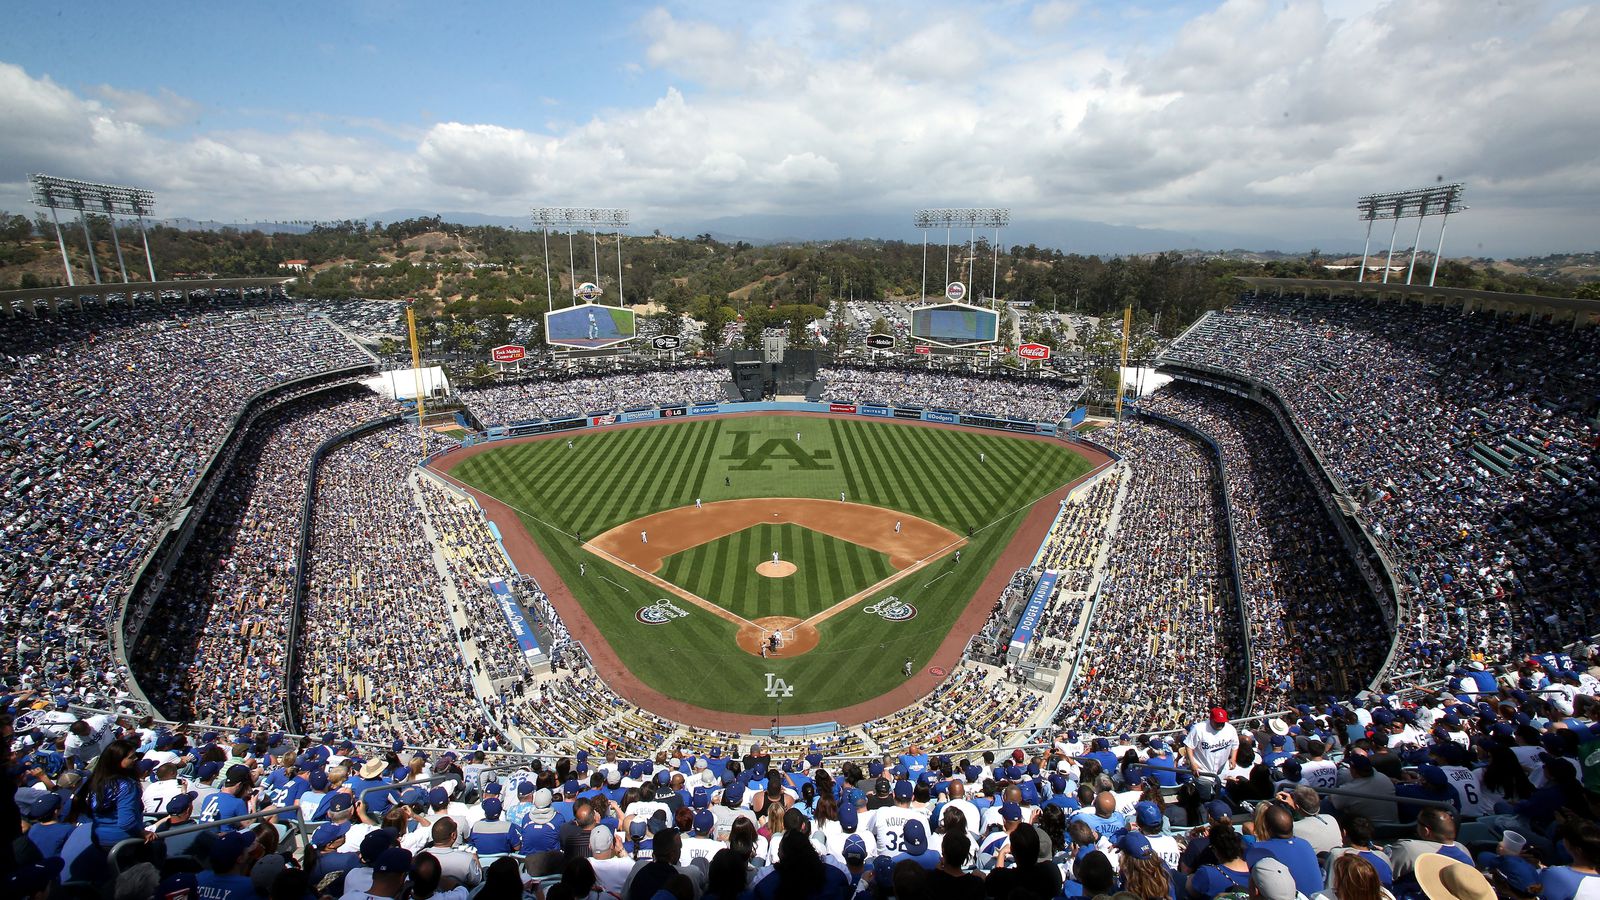 According to some reports there could be an outdoor NHL game at Dodger Stad...